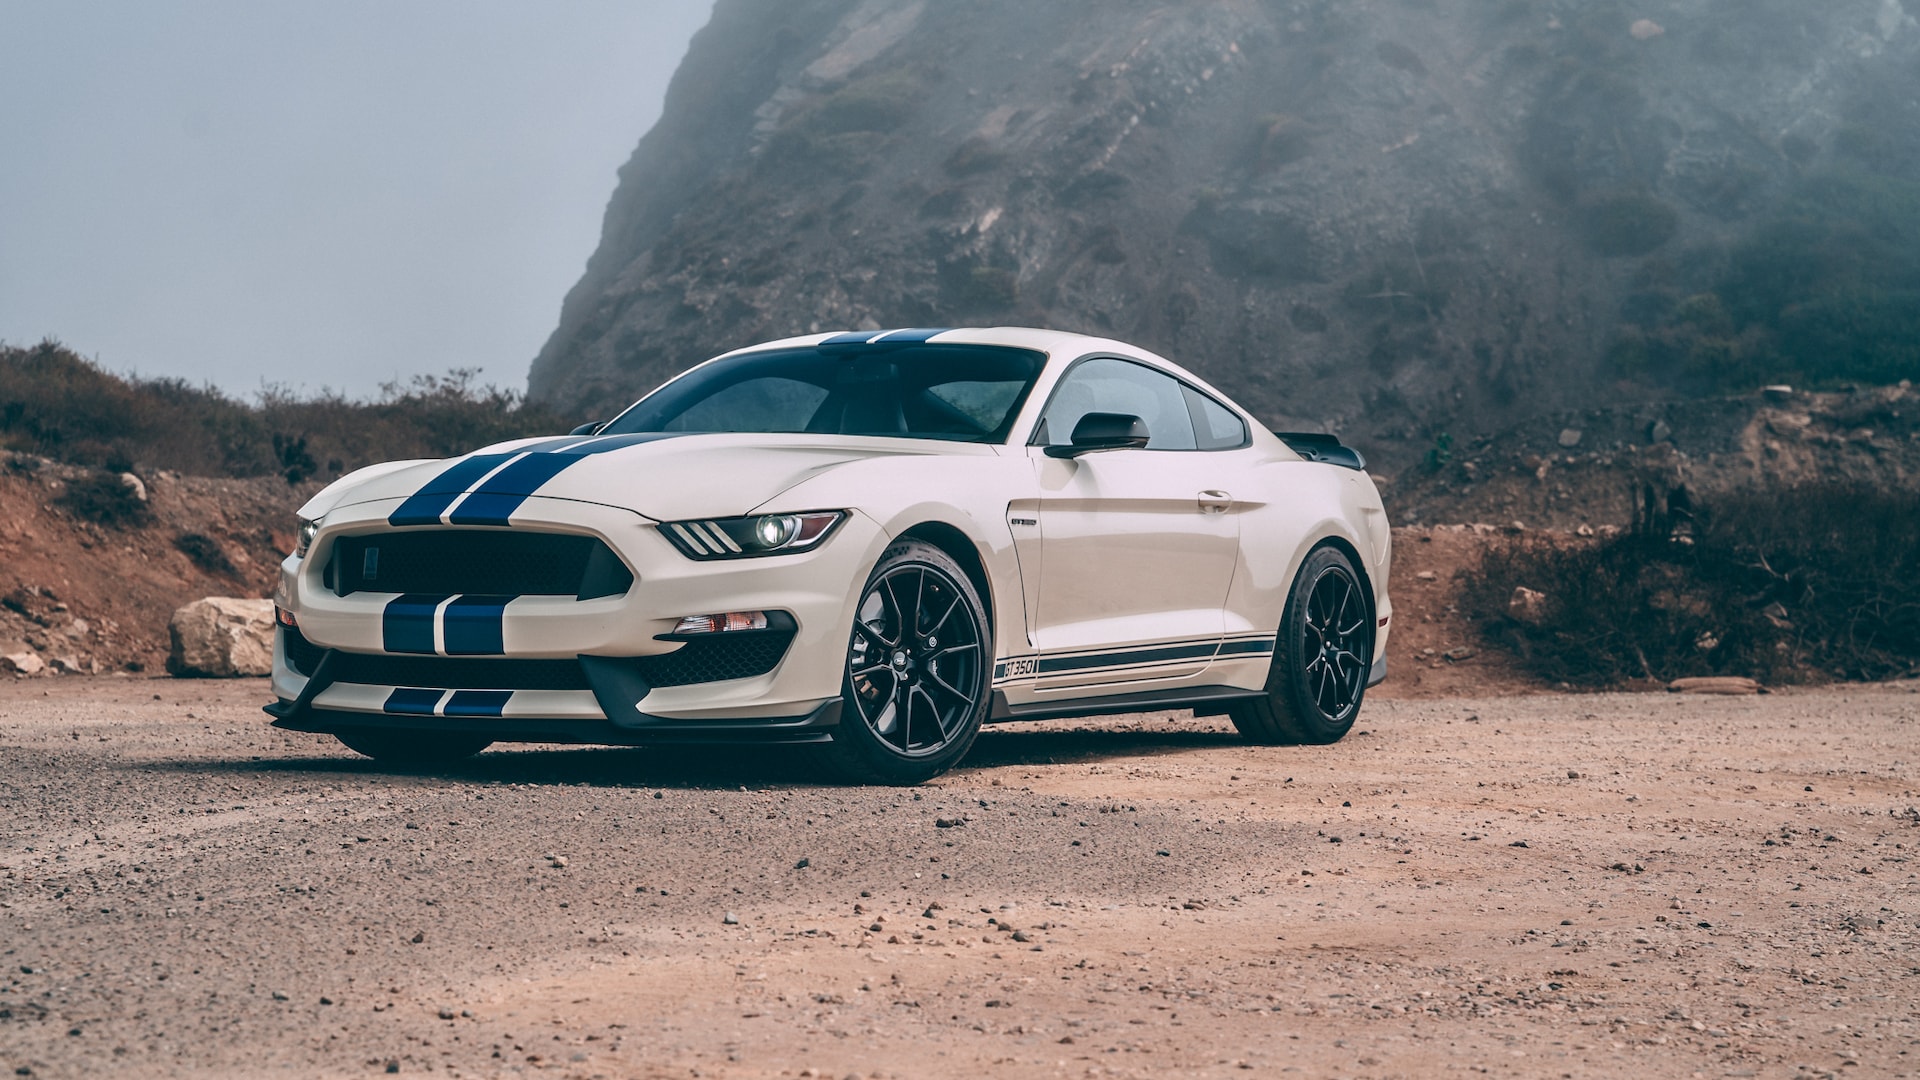 2020 Ford Mustang Shelby GT350 Heritage Edition: A Final Drive to Remember